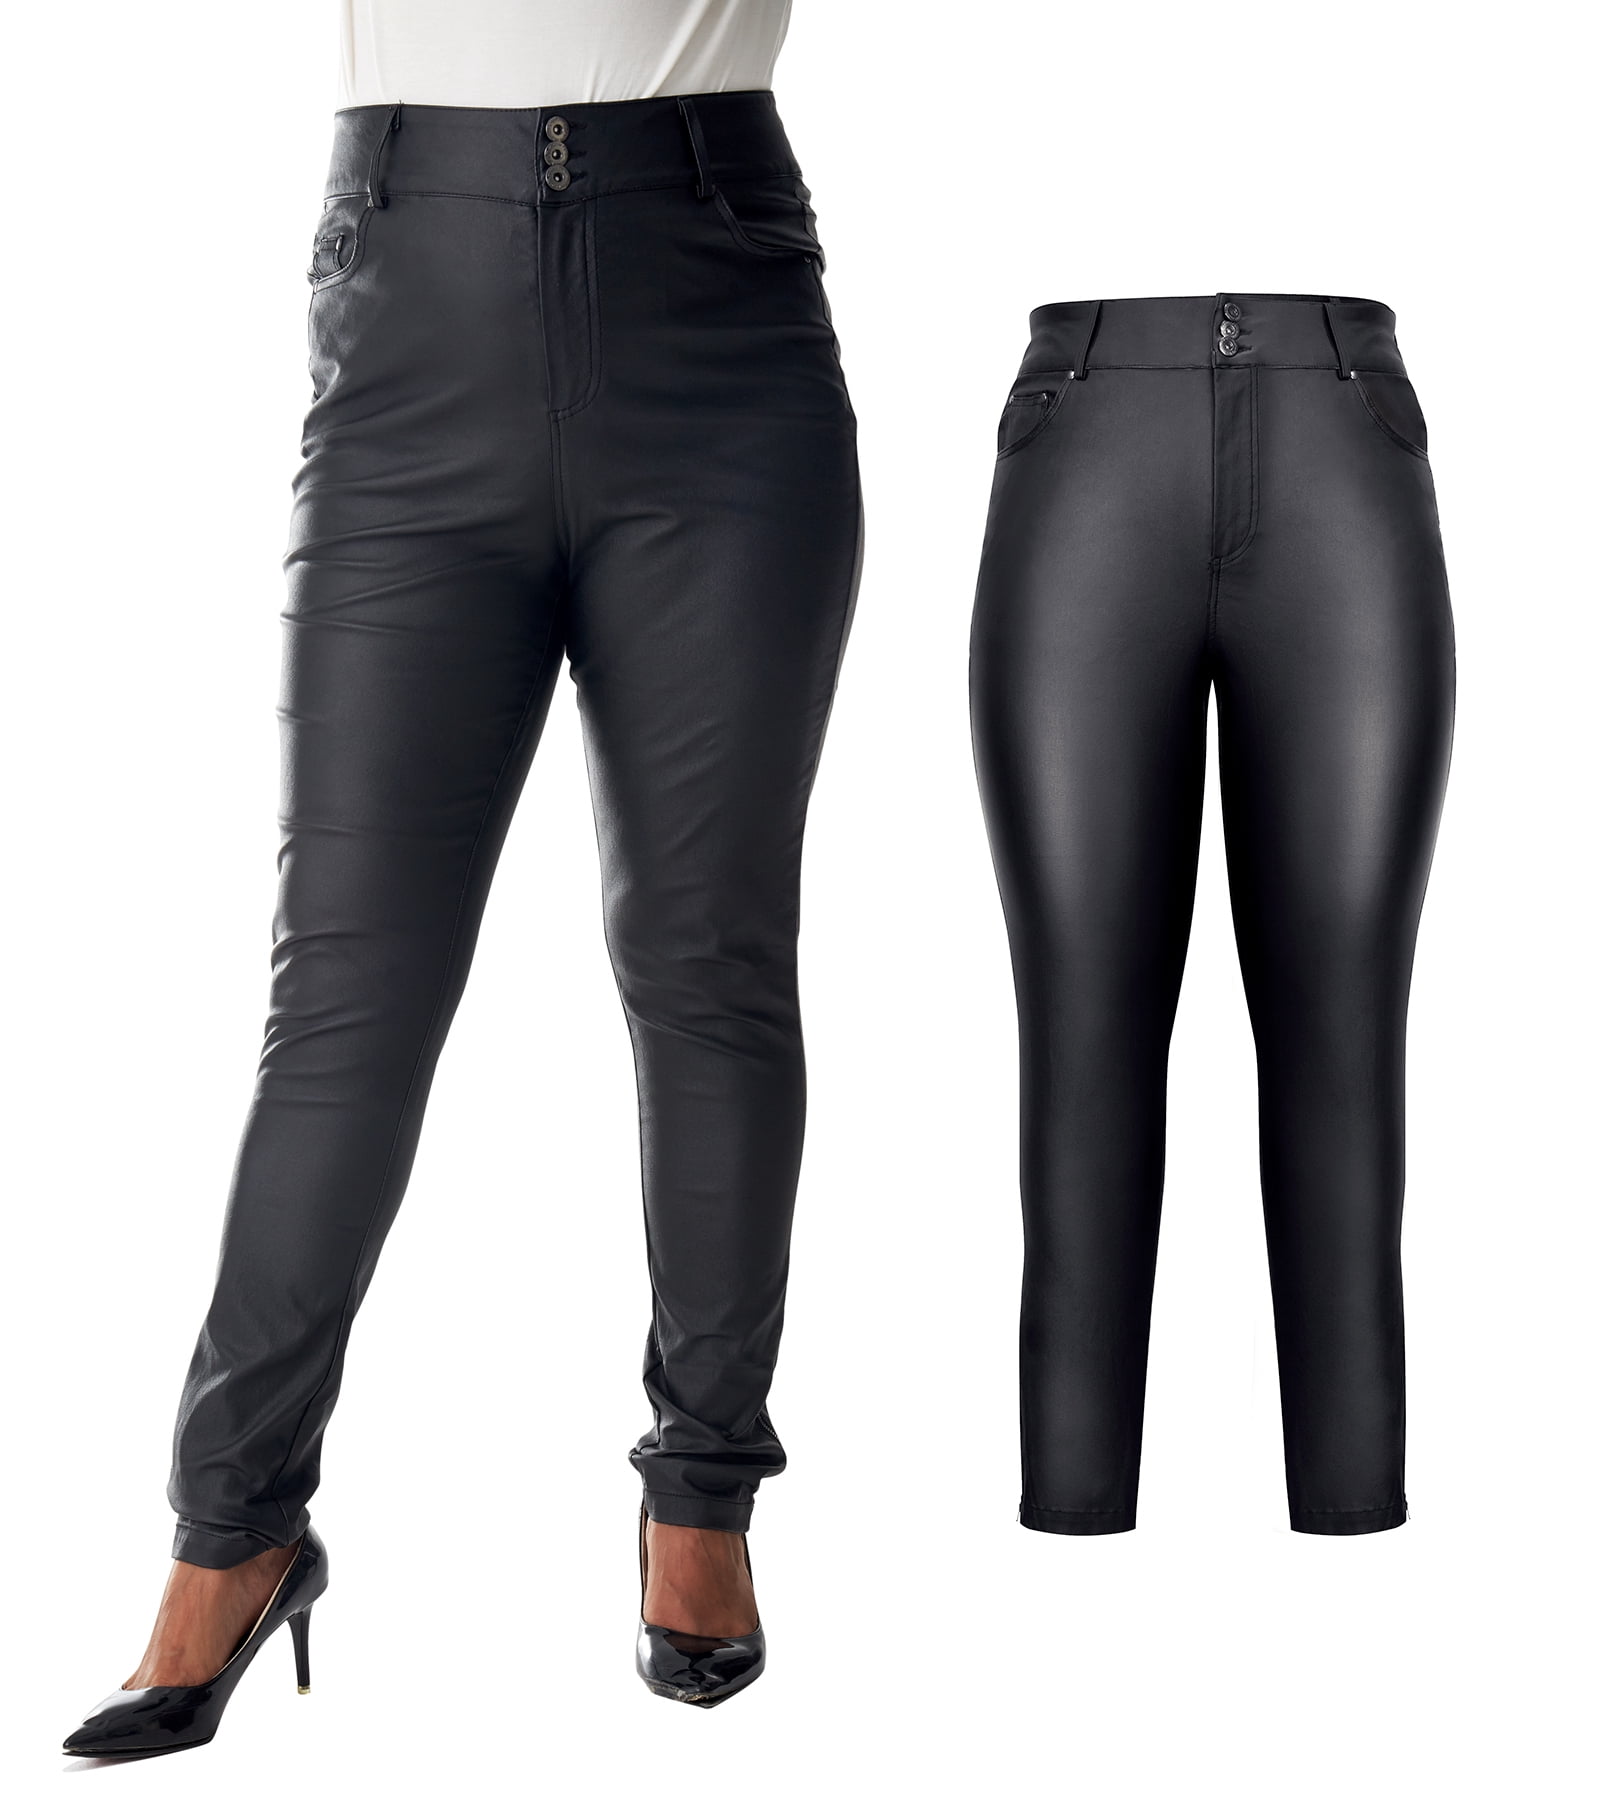 S P Y M Women's Stretchy Jeggings, Faux Leather Legging Pants